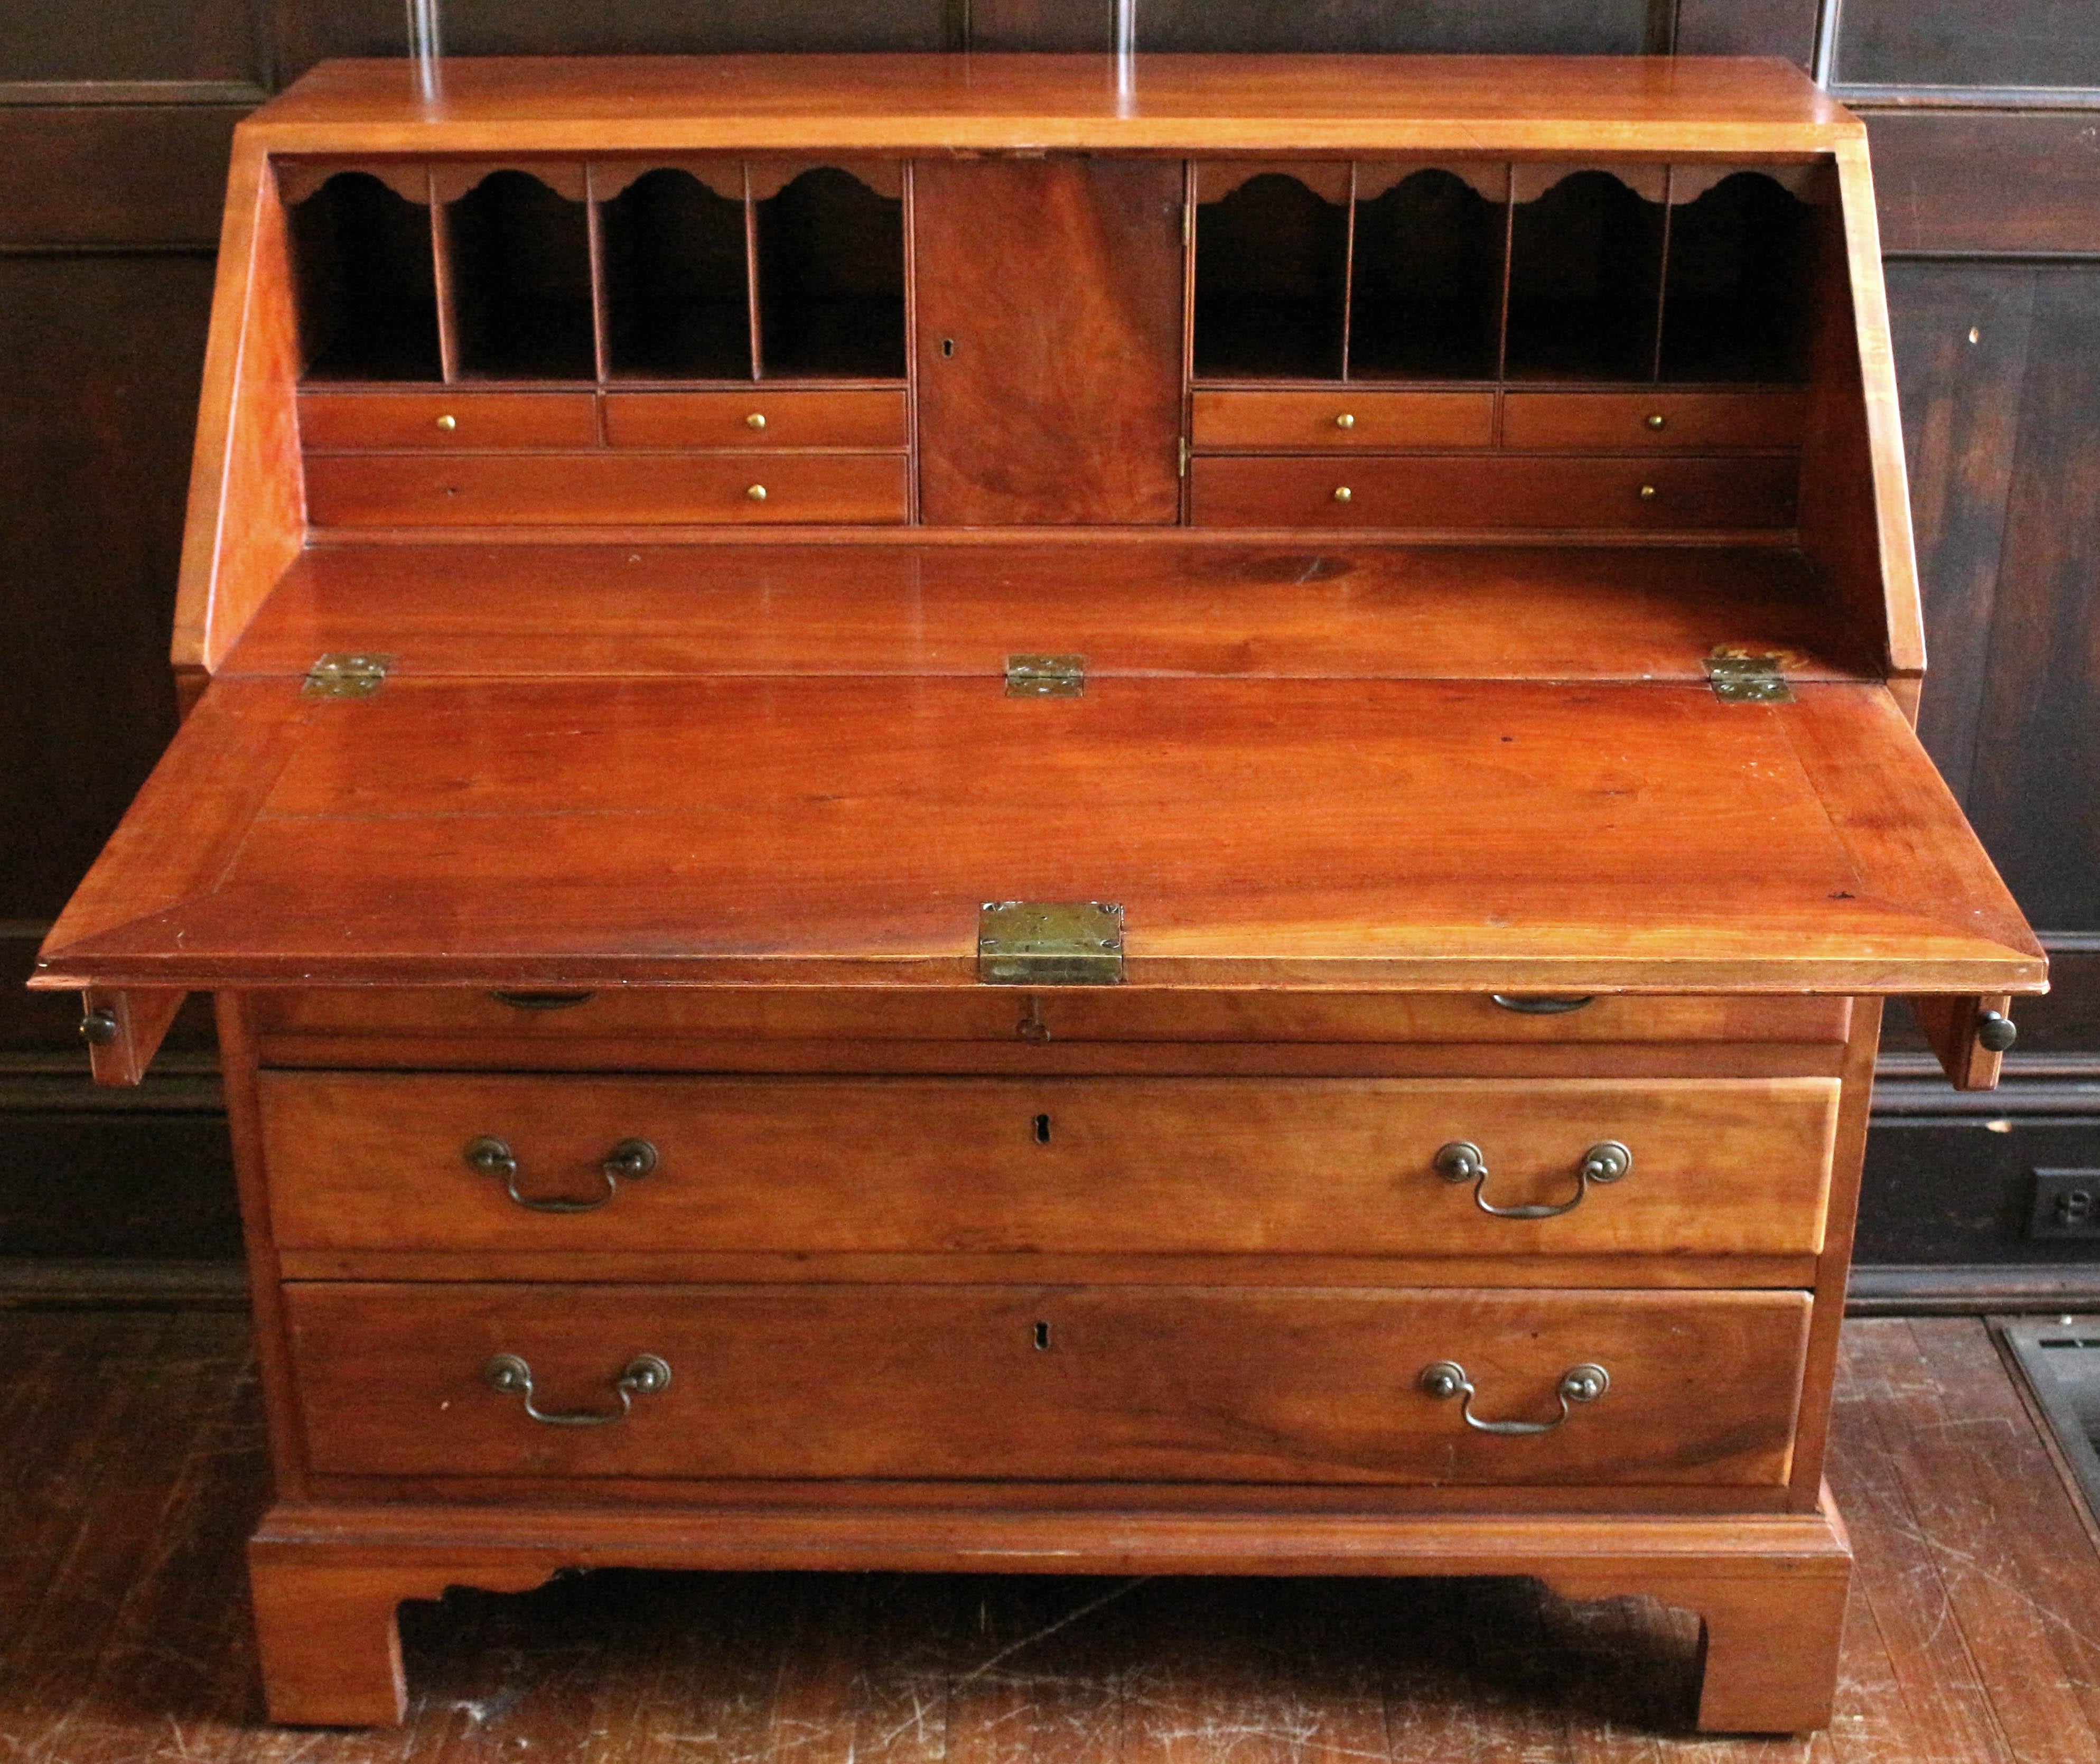 Circa 1780-1810 American slant-front desk of well figured solid flame birch, cherry, and birch. Classic mix of woods. Yellow pine secondary wood, typical of the upper South (Kentucky). Well fitted interior of valanced pigeon holes & drawers with